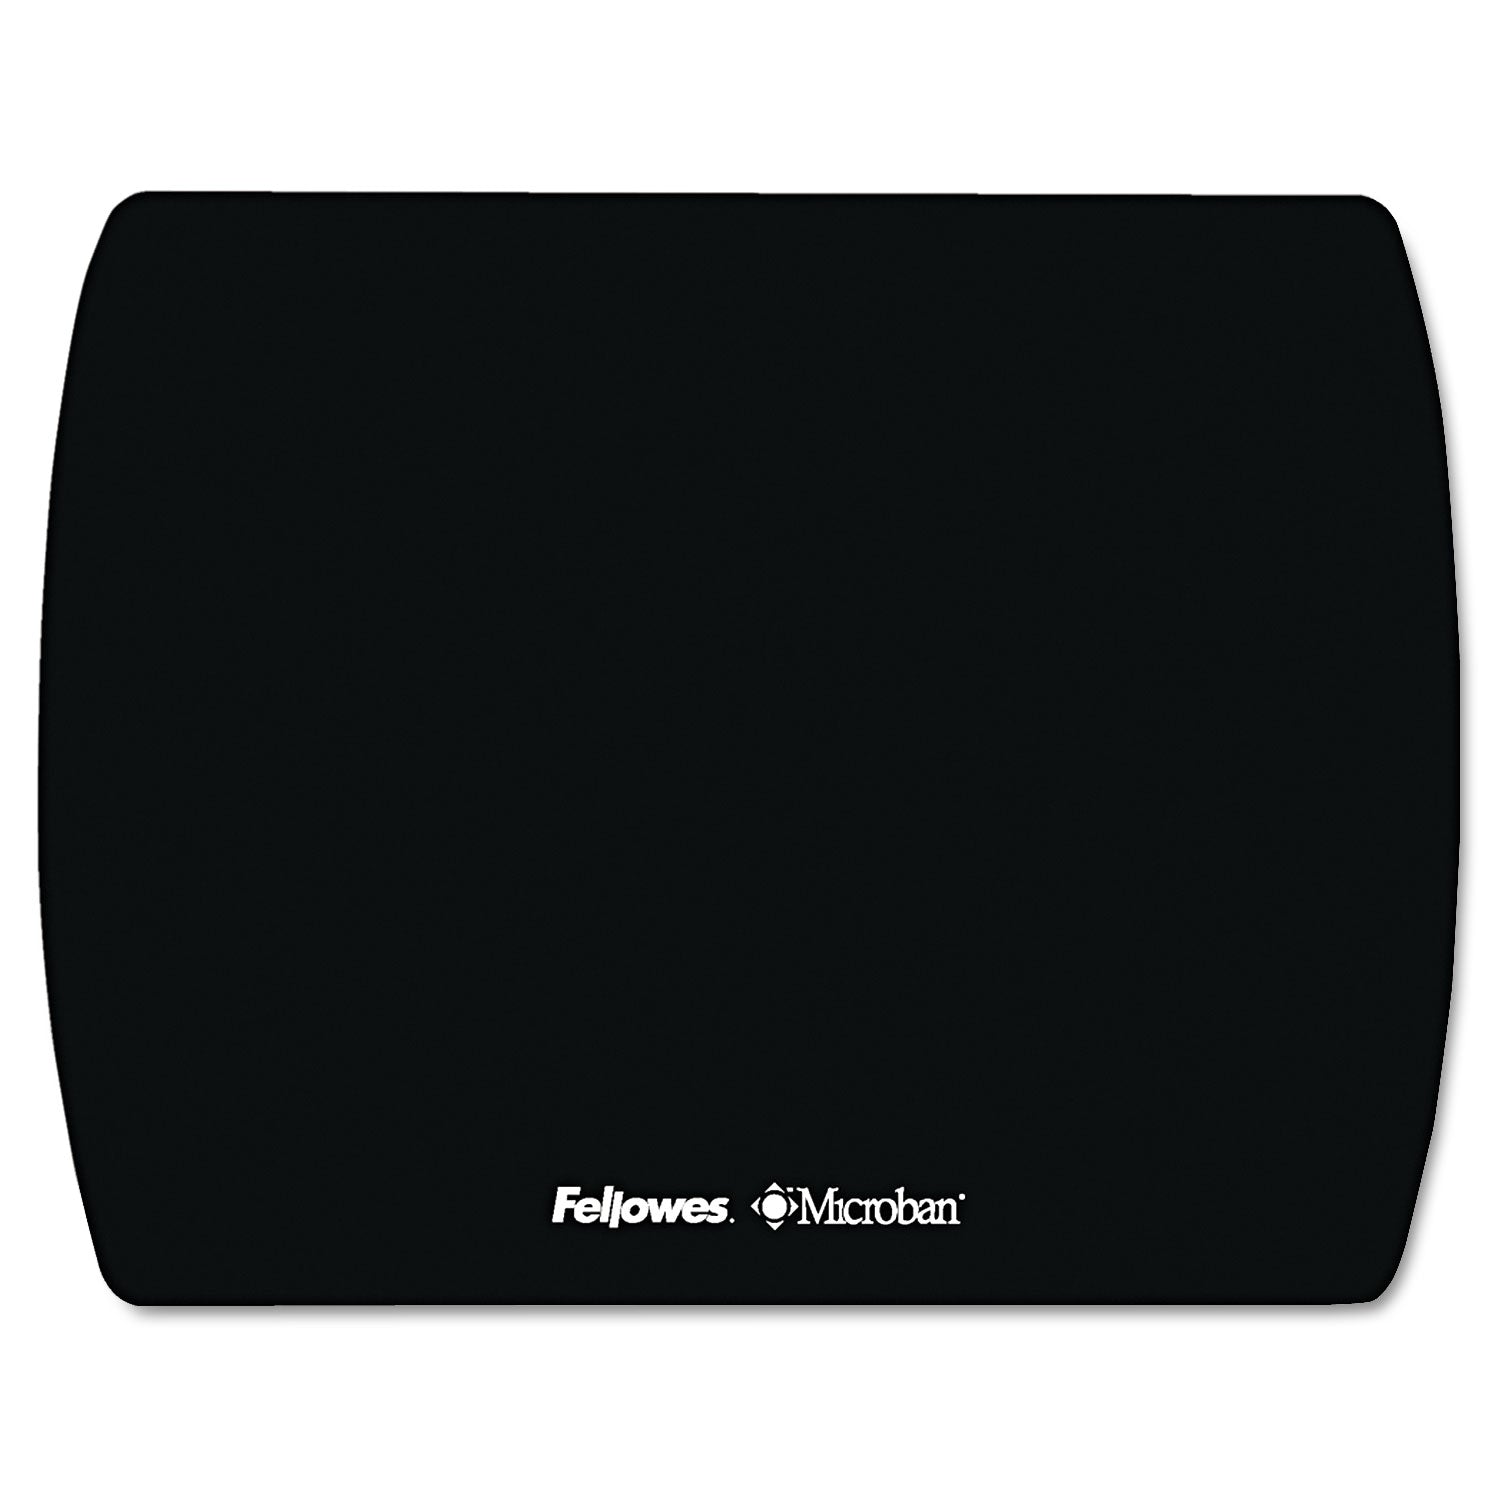 Ultra Thin Mouse Pad with Microban Protection, 9 x 7, Black - 